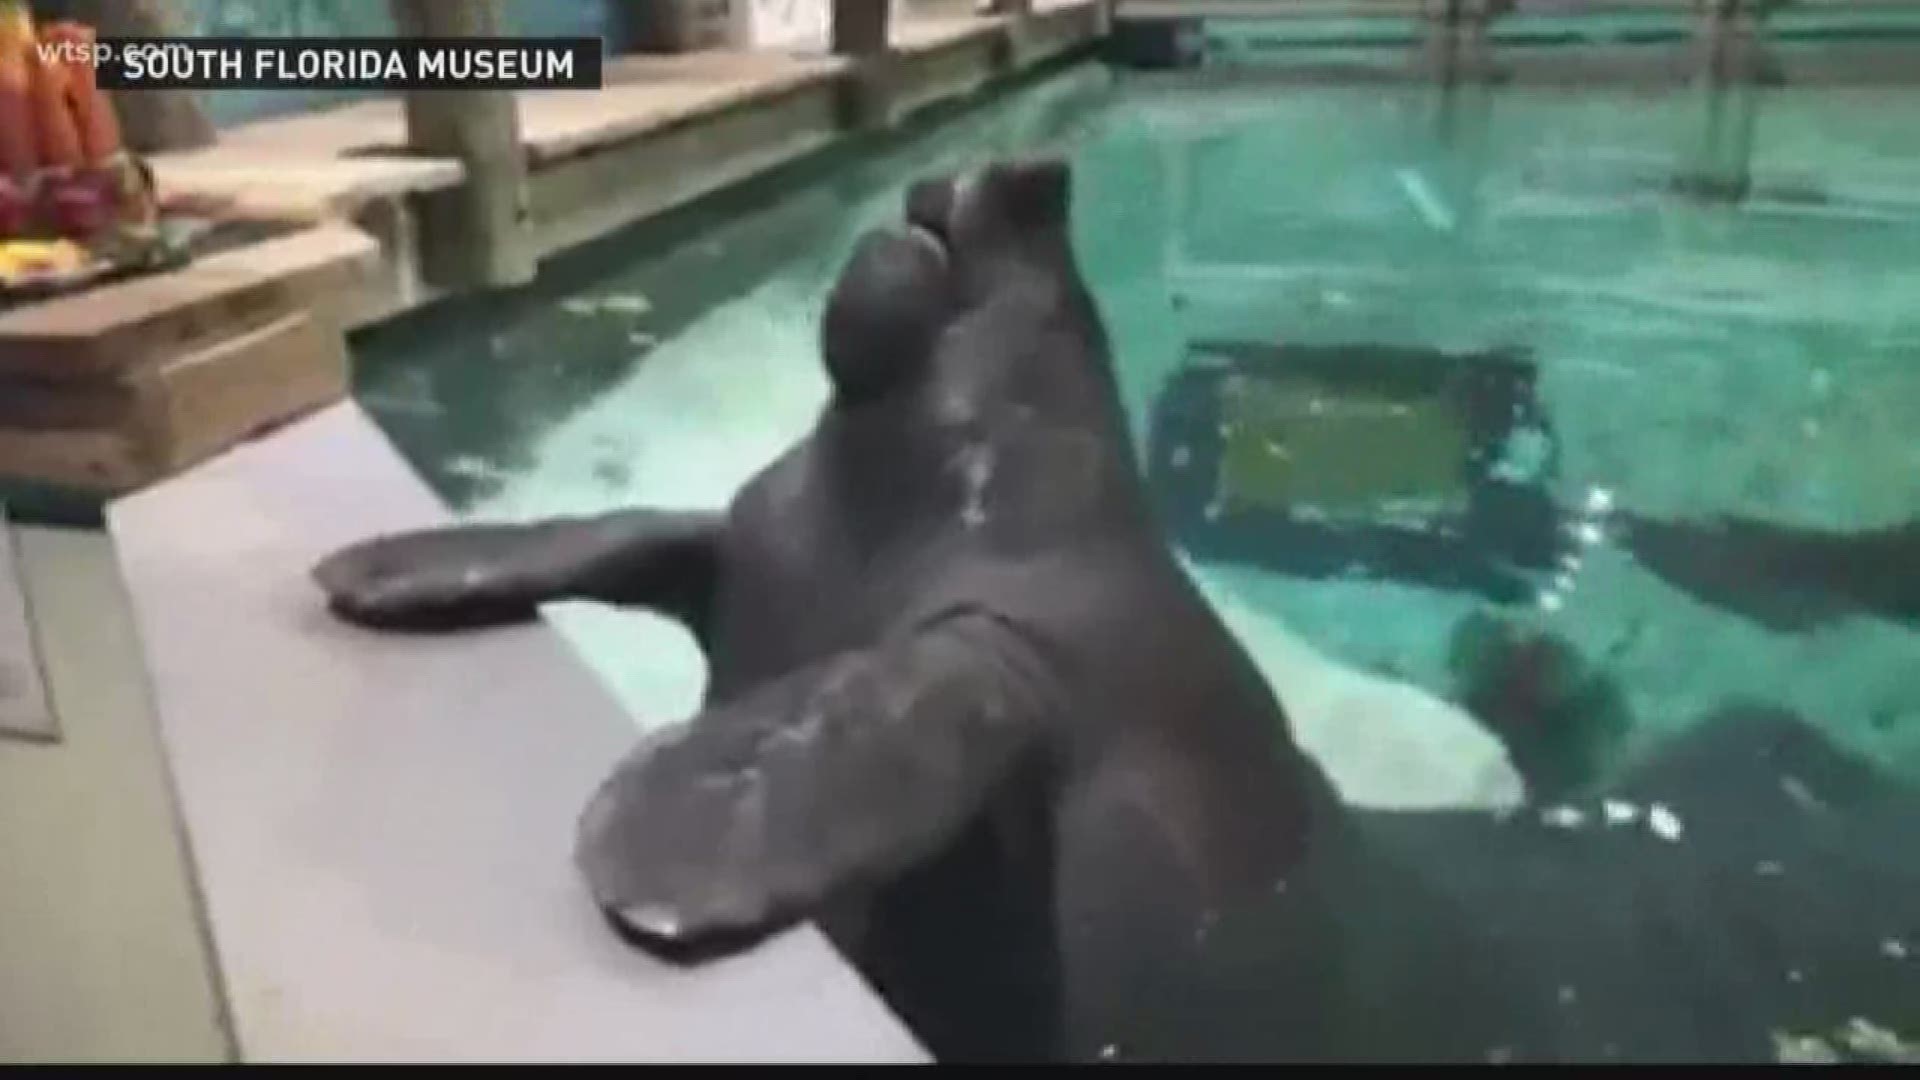 The South Florida Museum has made several changes since Snooty's death on July 23, 2017. https://on.wtsp.com/2M61N6r